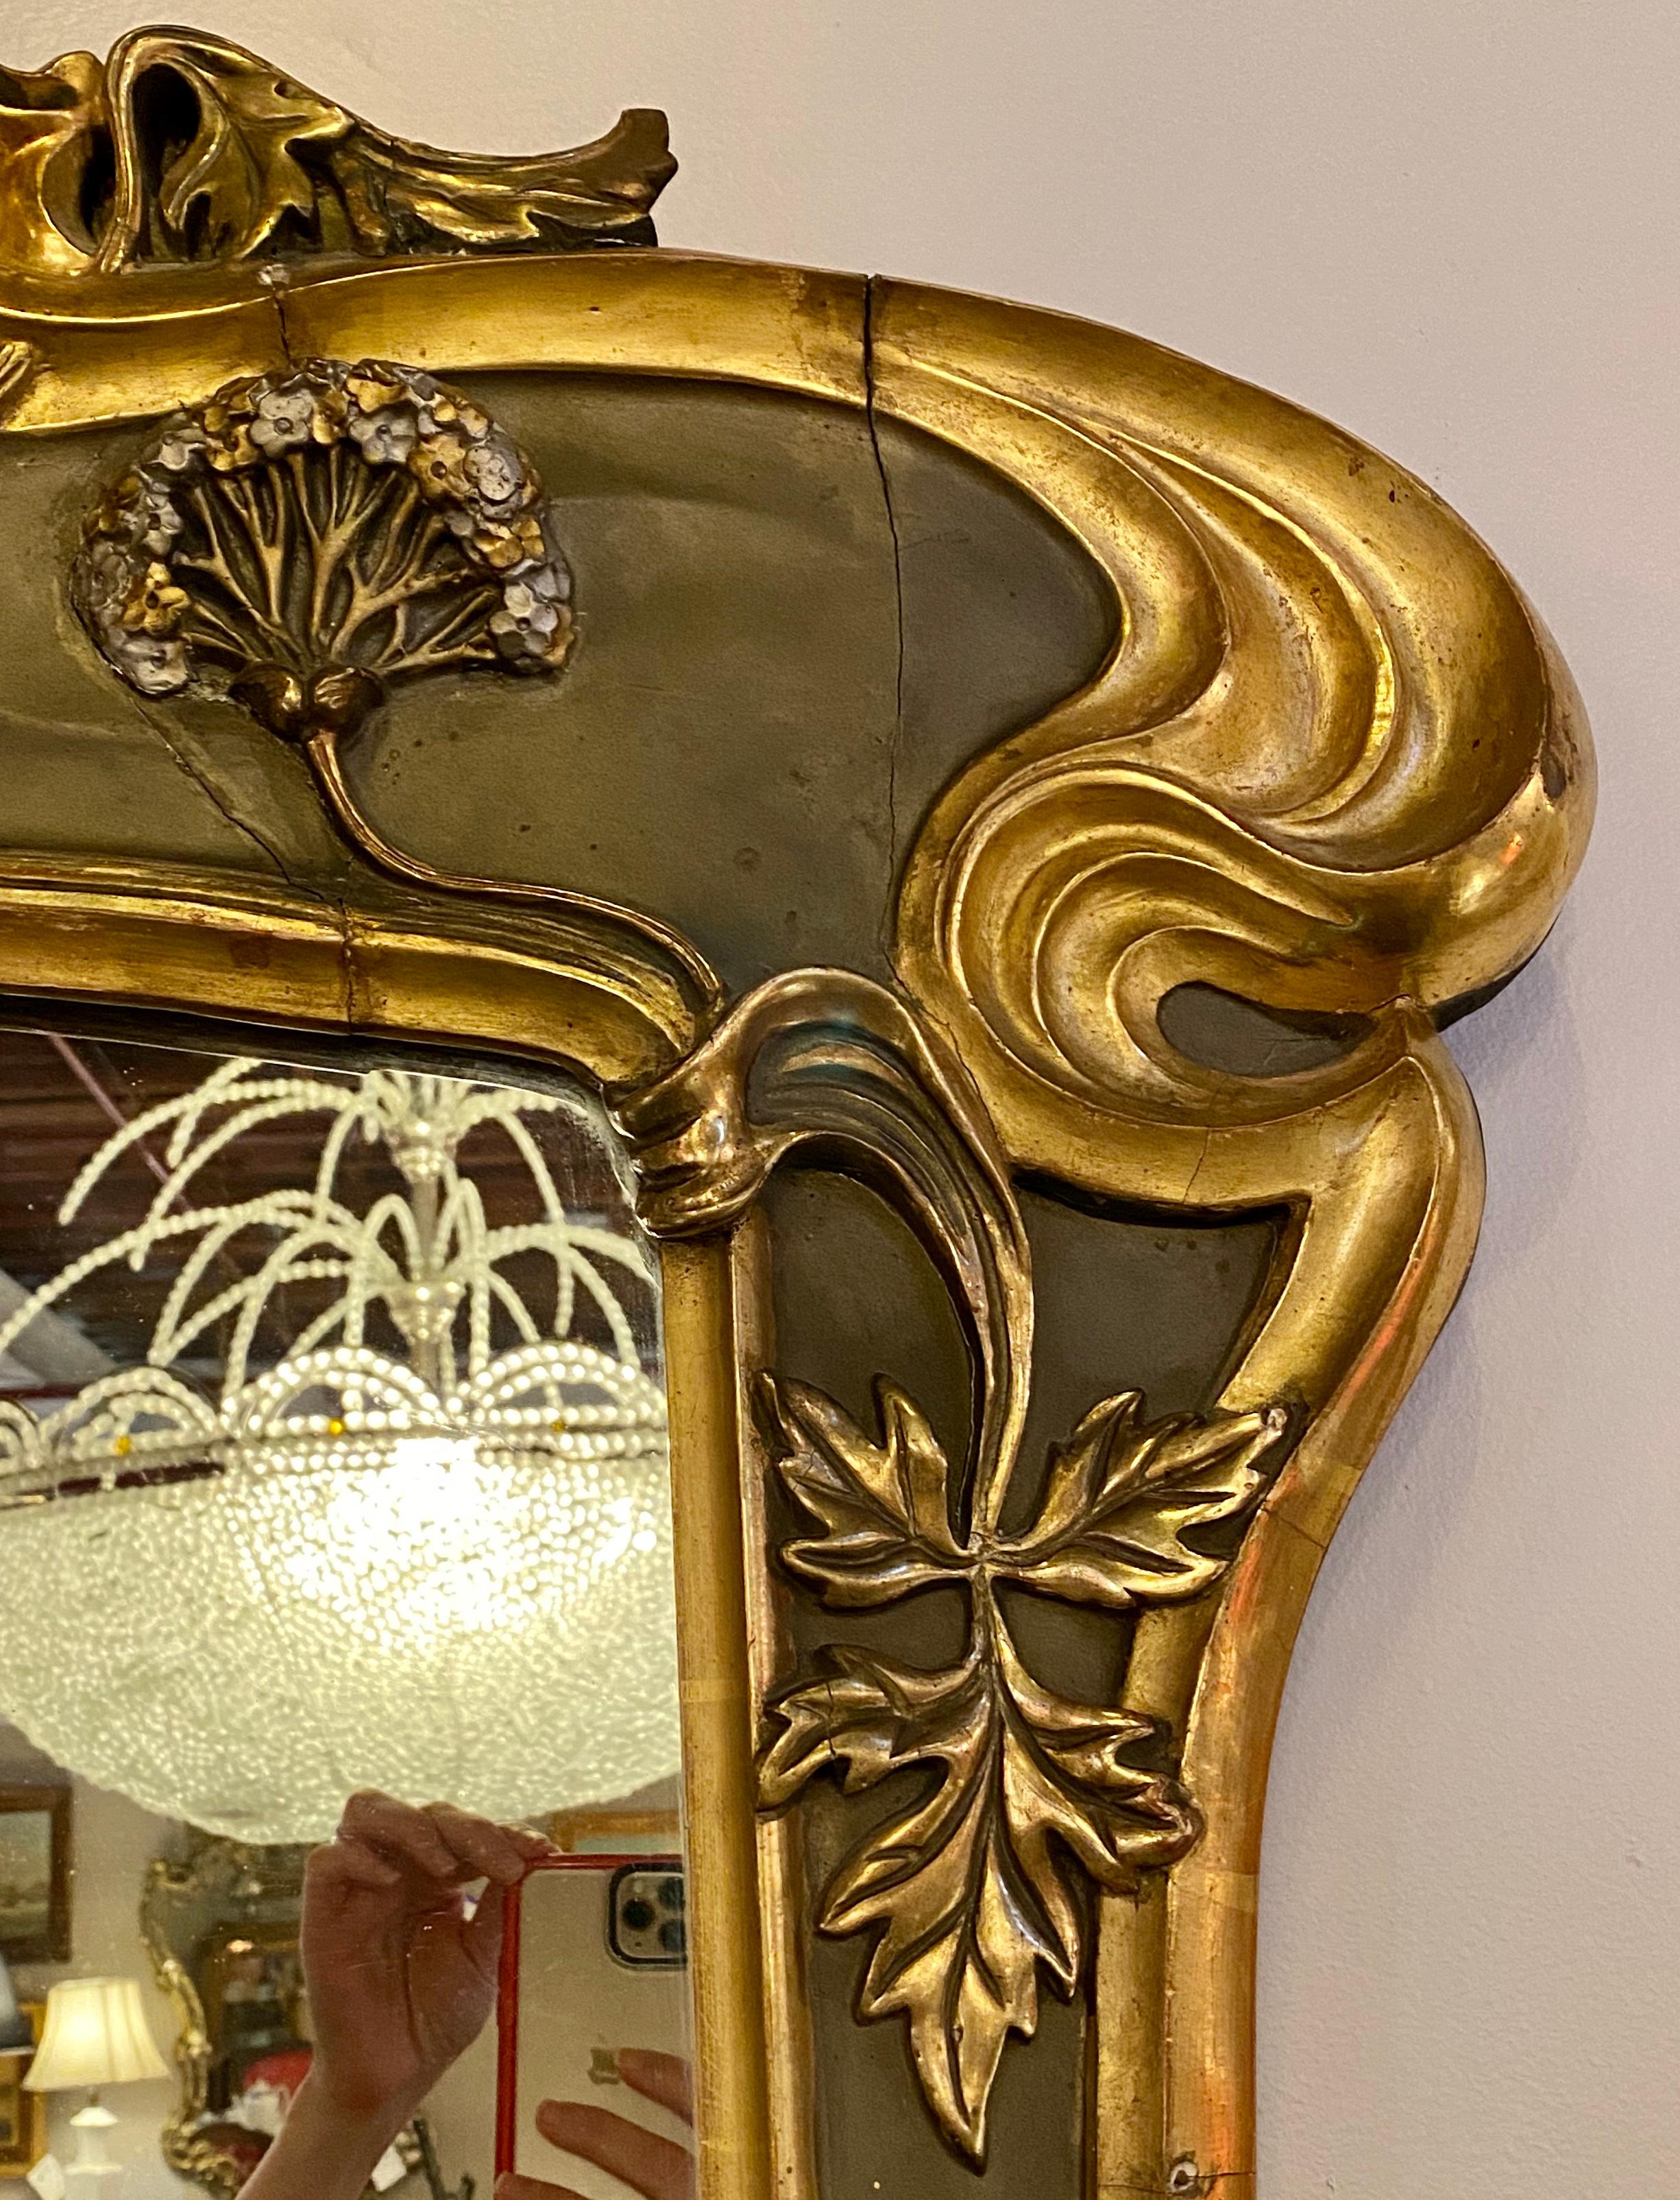 Belle époque style wall or over mantel mirror. This absolutely stunning Art Nouveau form wall mirror is paint and parcel-gilt decorated having rose, floral and leave carvings in gilt gold the like of which one rarely ever sees. The workmanship of